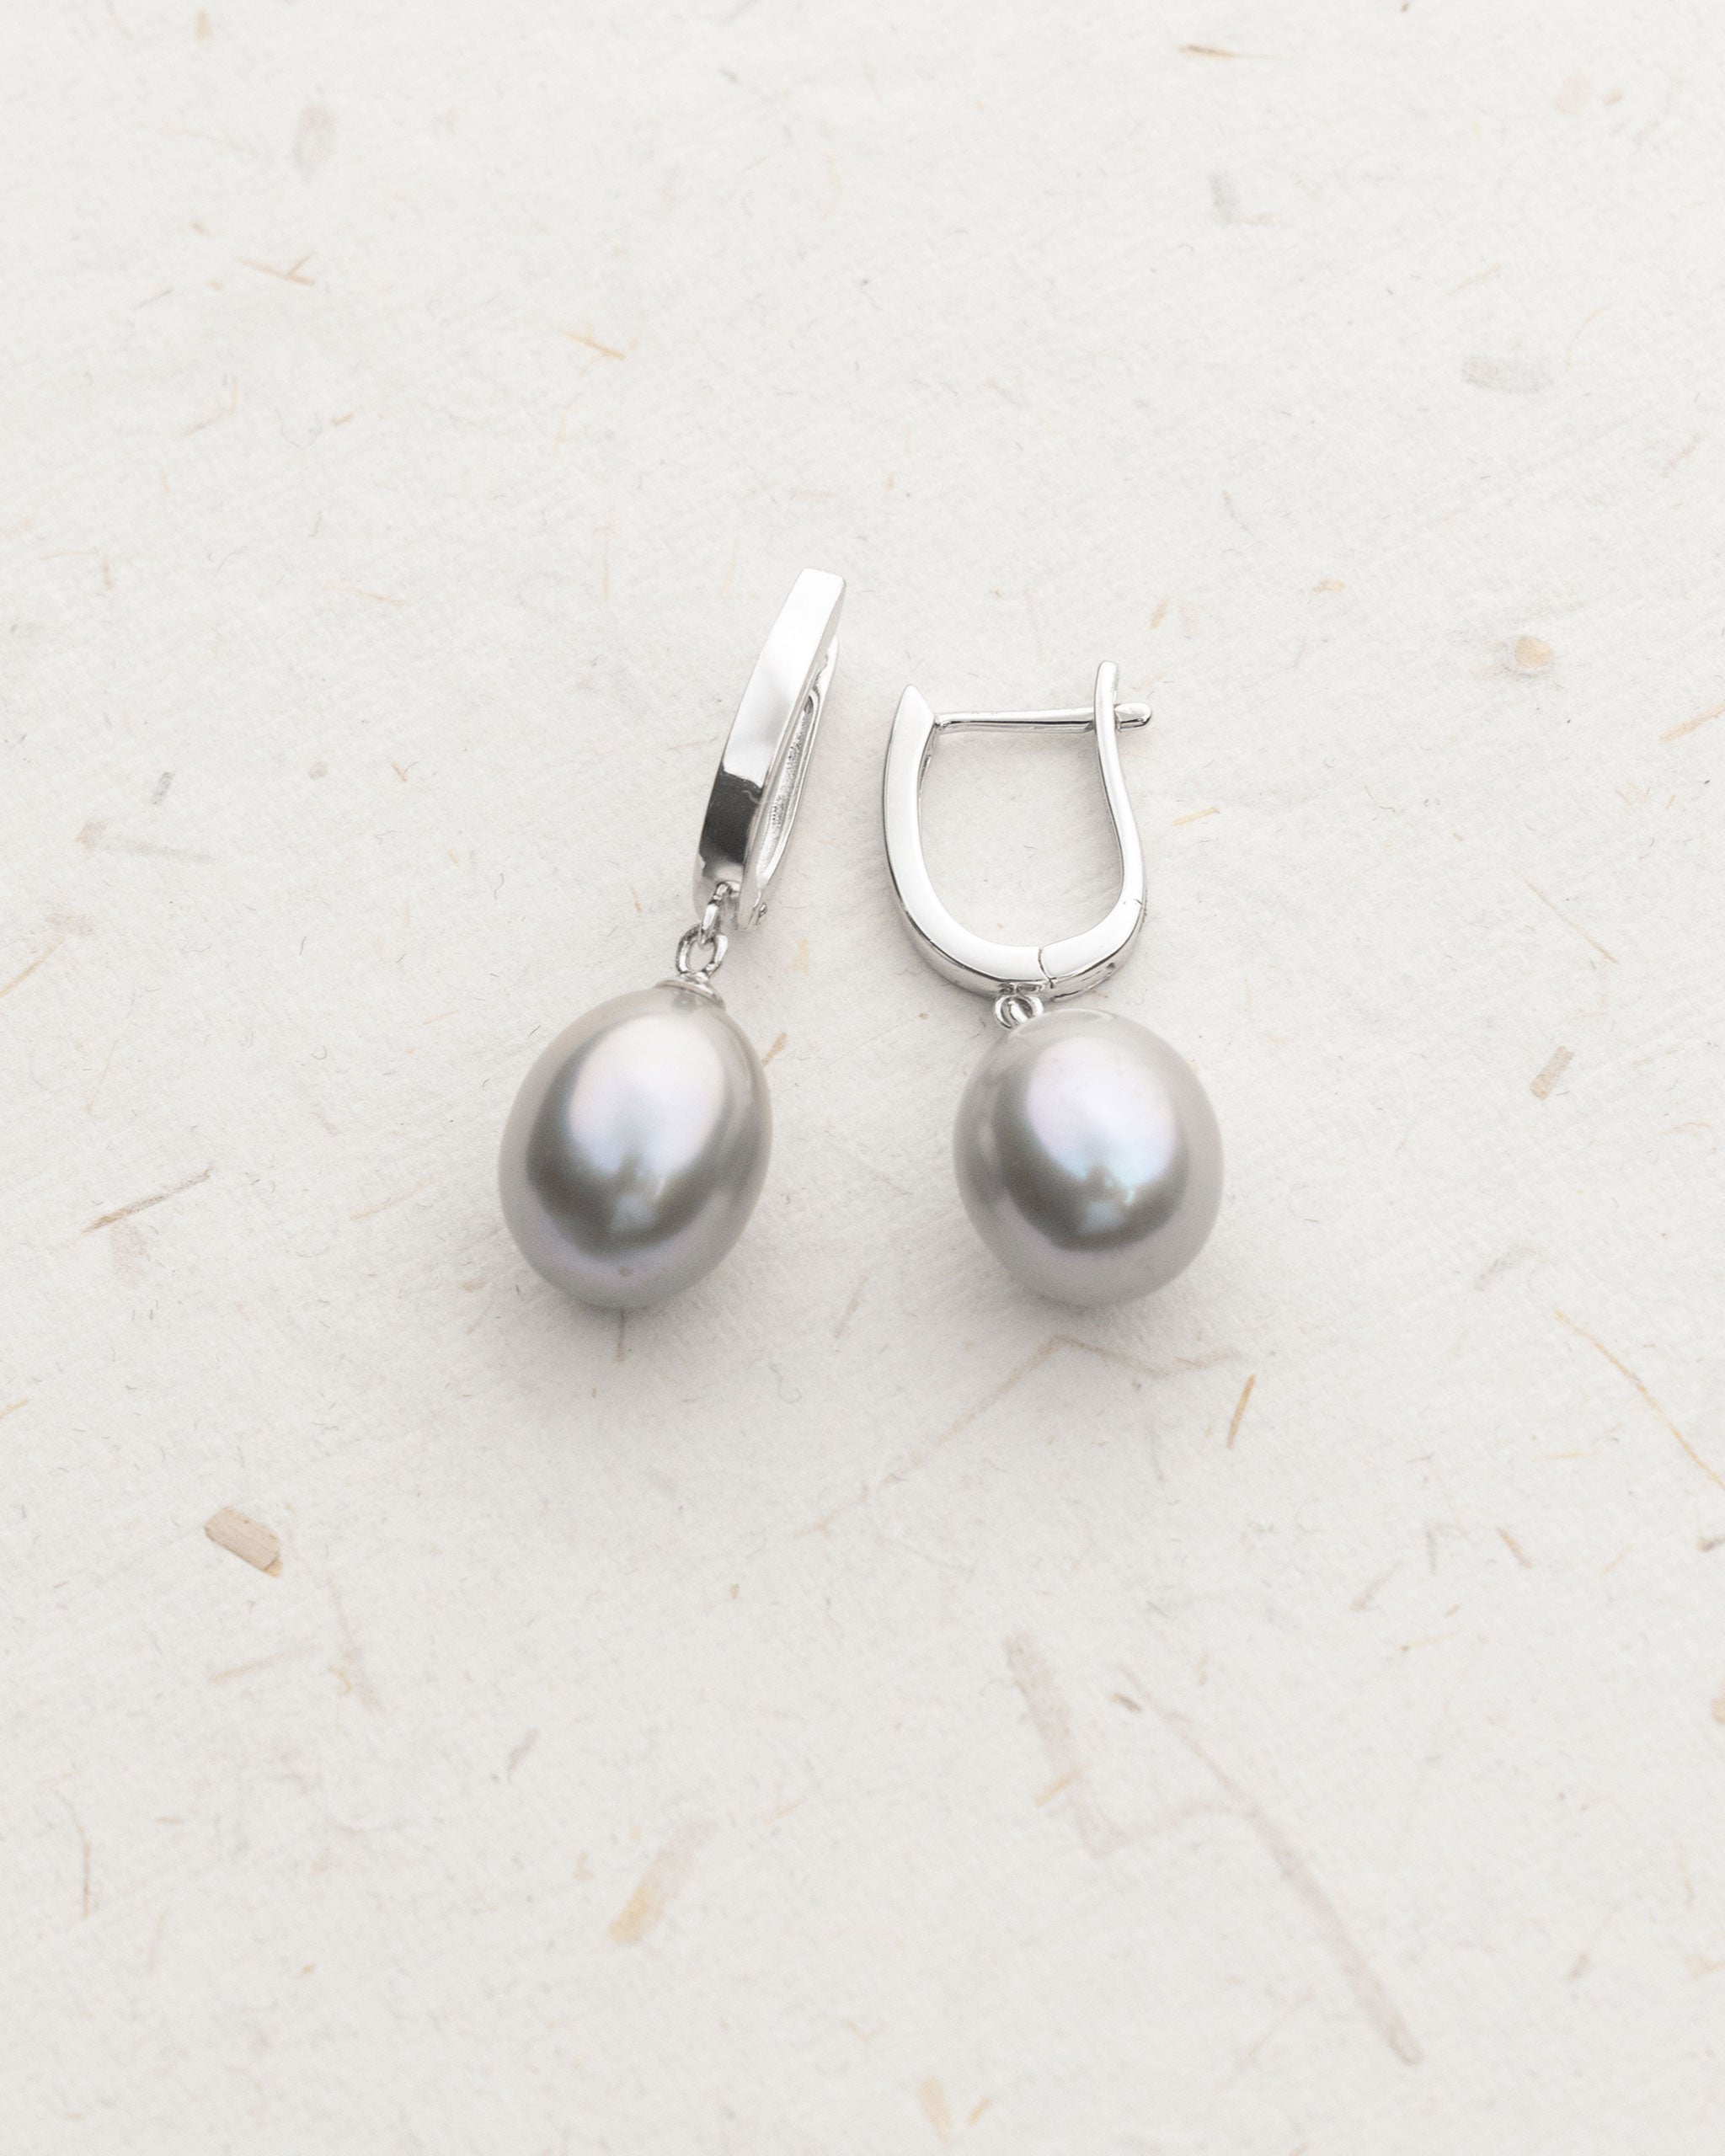 10-11 mm Gray Drop Type Cultured Freshwater Pearl Earrings and Sterling Silver